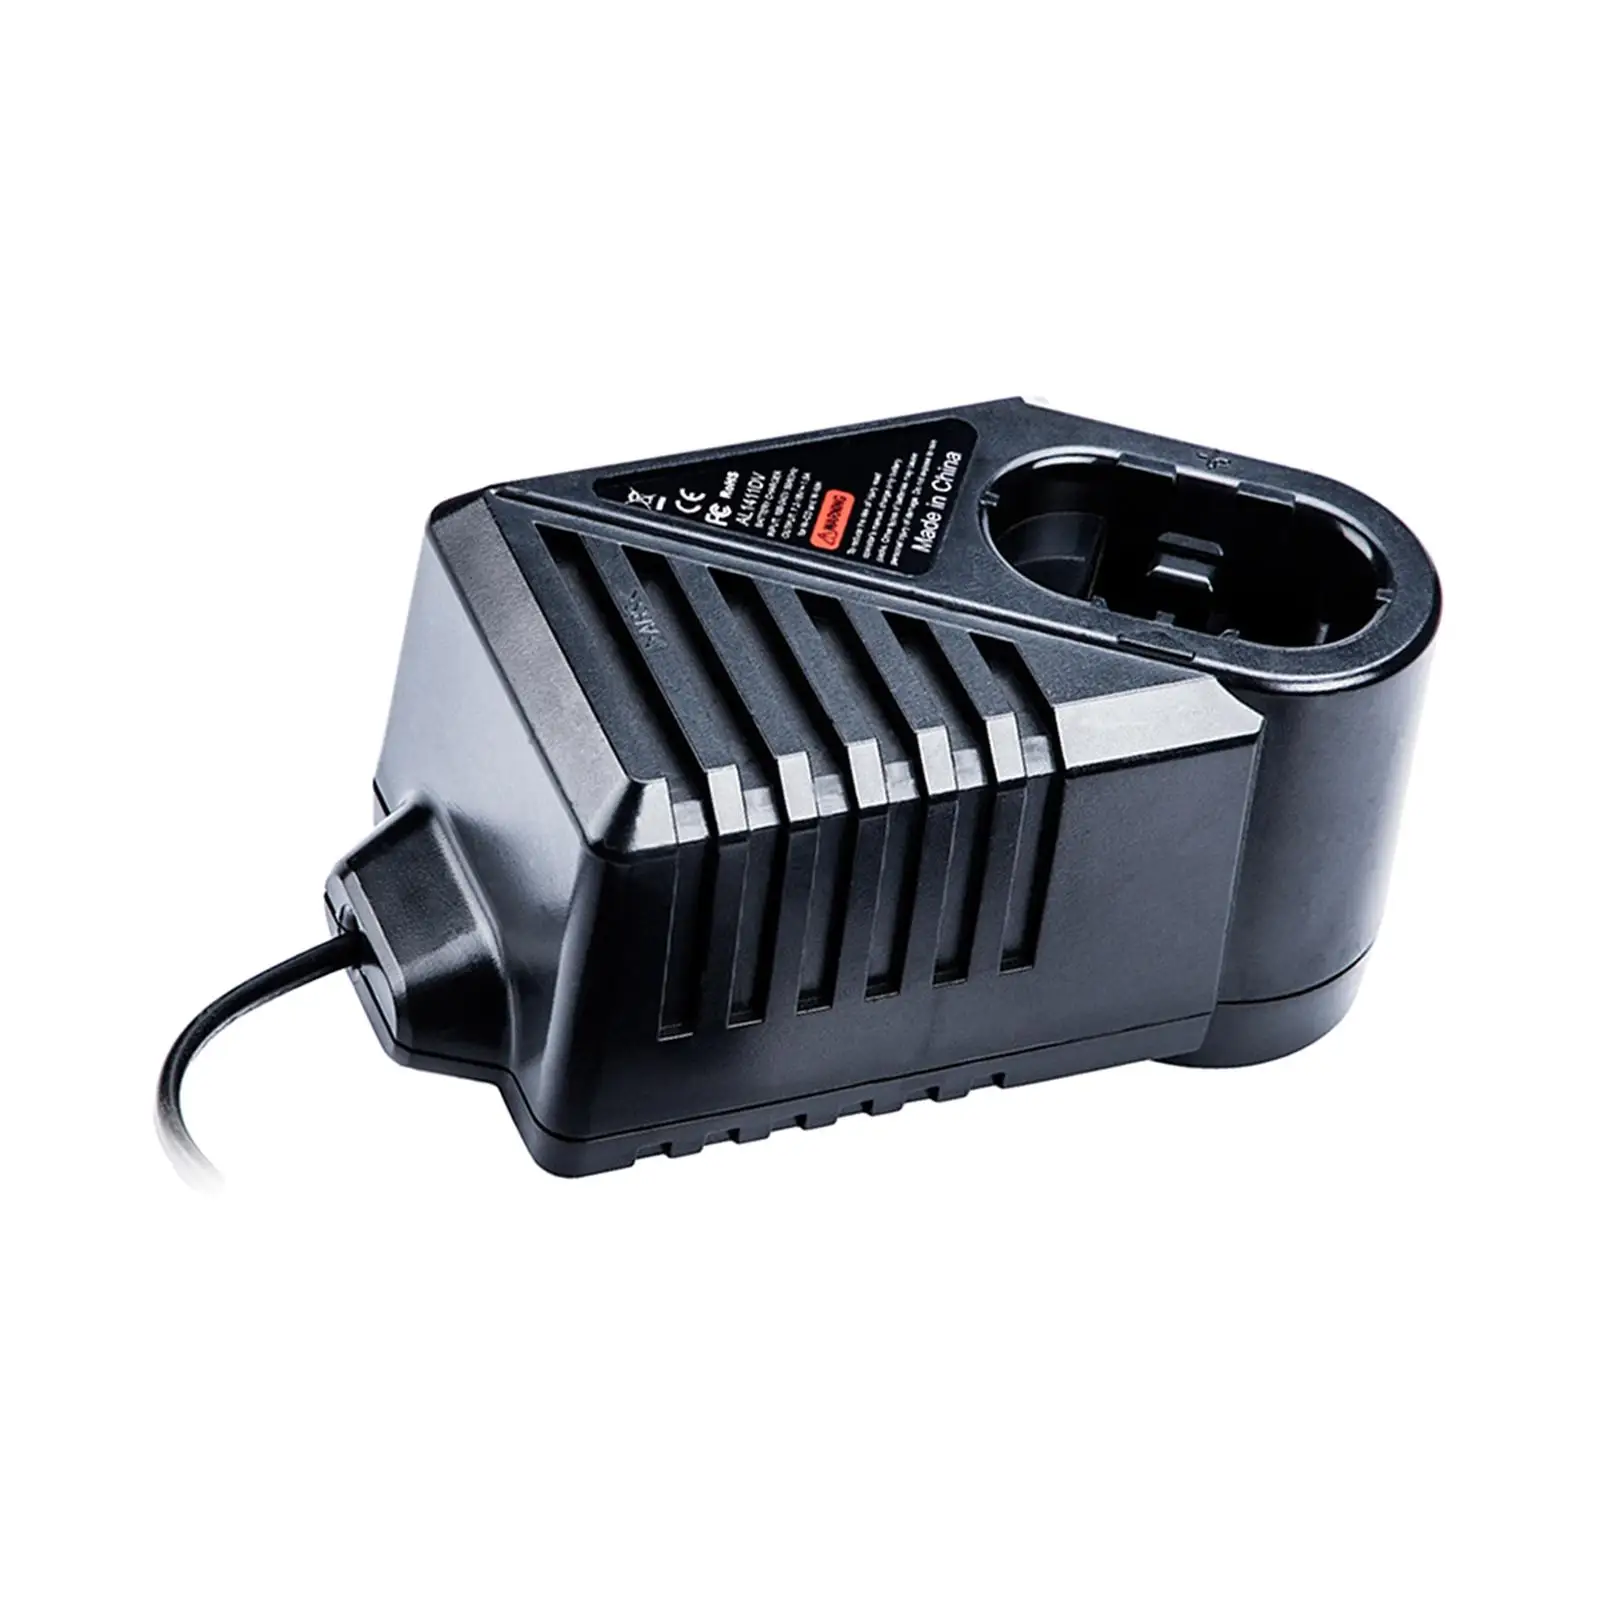 Power Tool Battery Charger Smart Protection Bat038 Bat048 Replacement for 7.2 -18V Ni-mh Ni-cd Gsr1 Gsr14.4-2 Gsb14.4-2